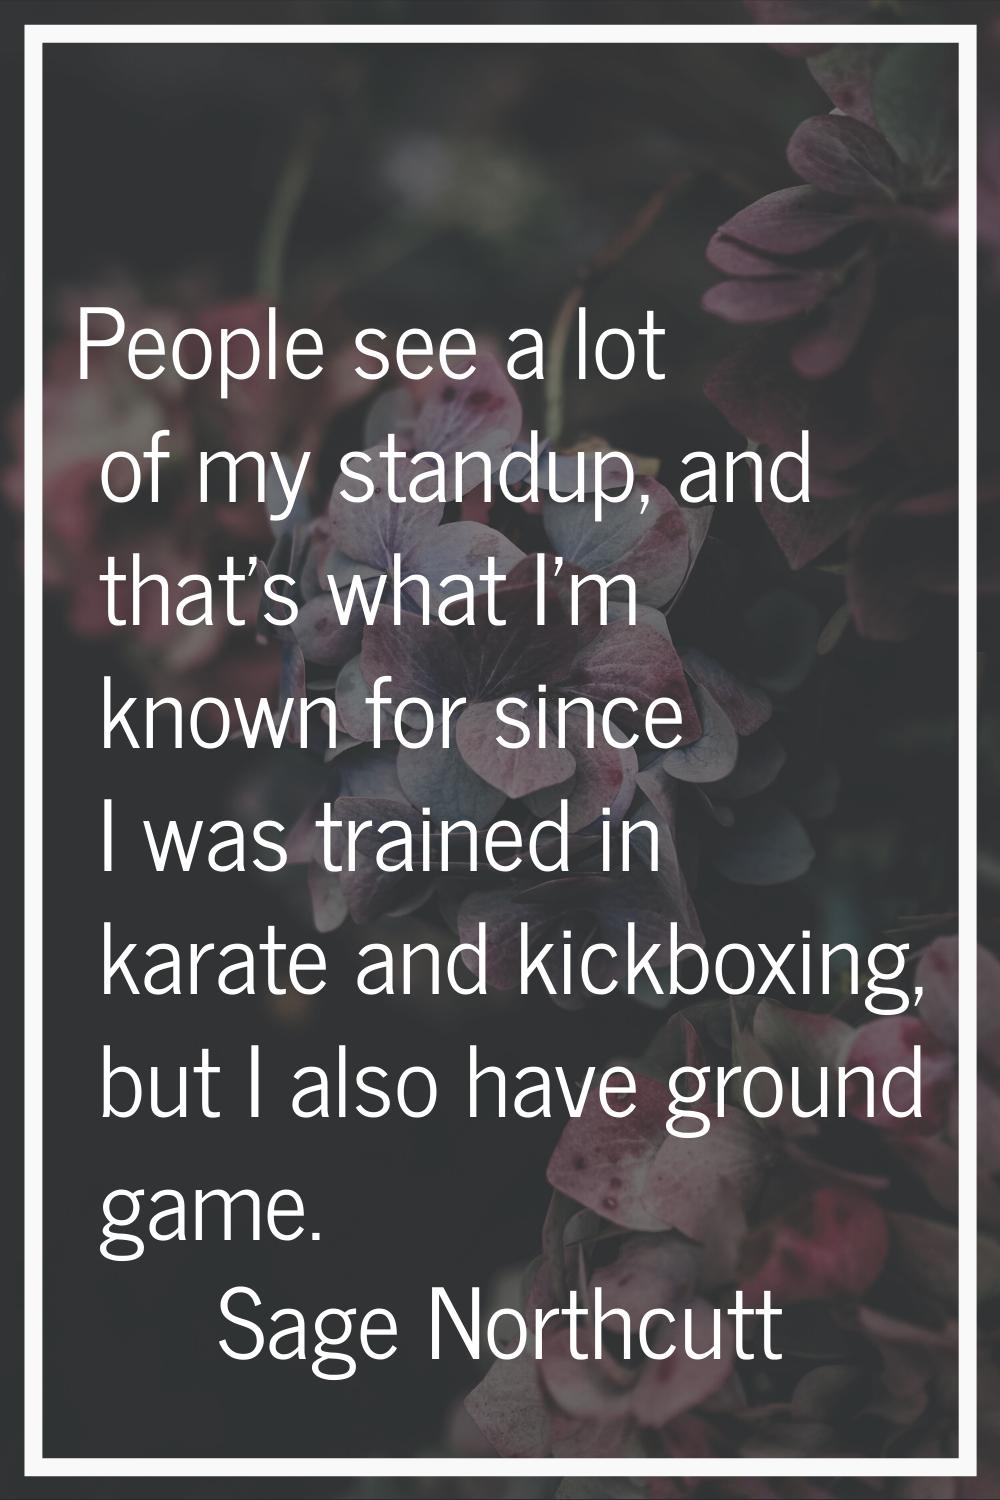 People see a lot of my standup, and that's what I'm known for since I was trained in karate and kic